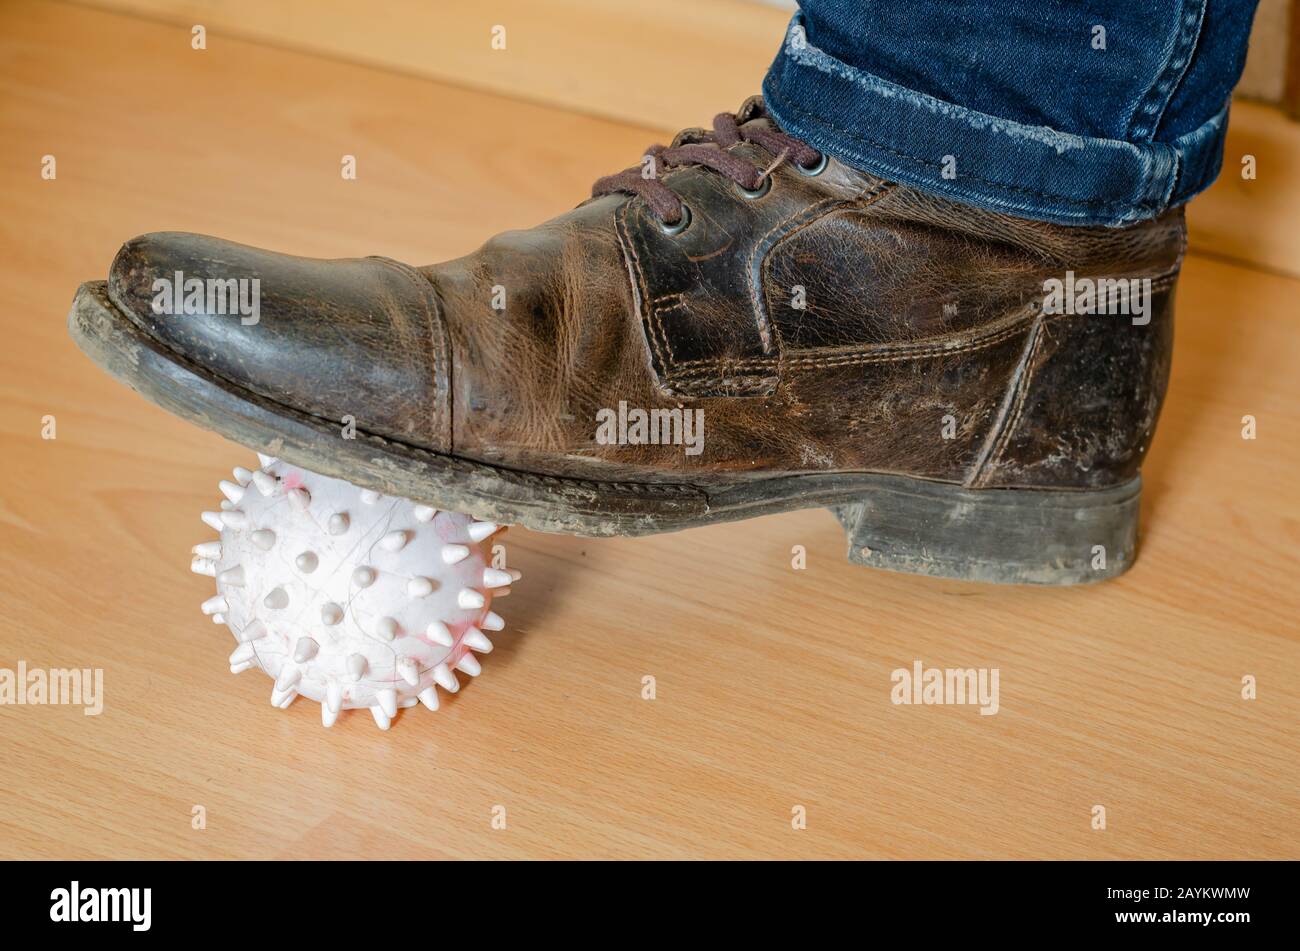 A light rubber ball with spikes is pressed to the wooden floor with a dirty boot. Close-up. Selective focus. Stock Photo